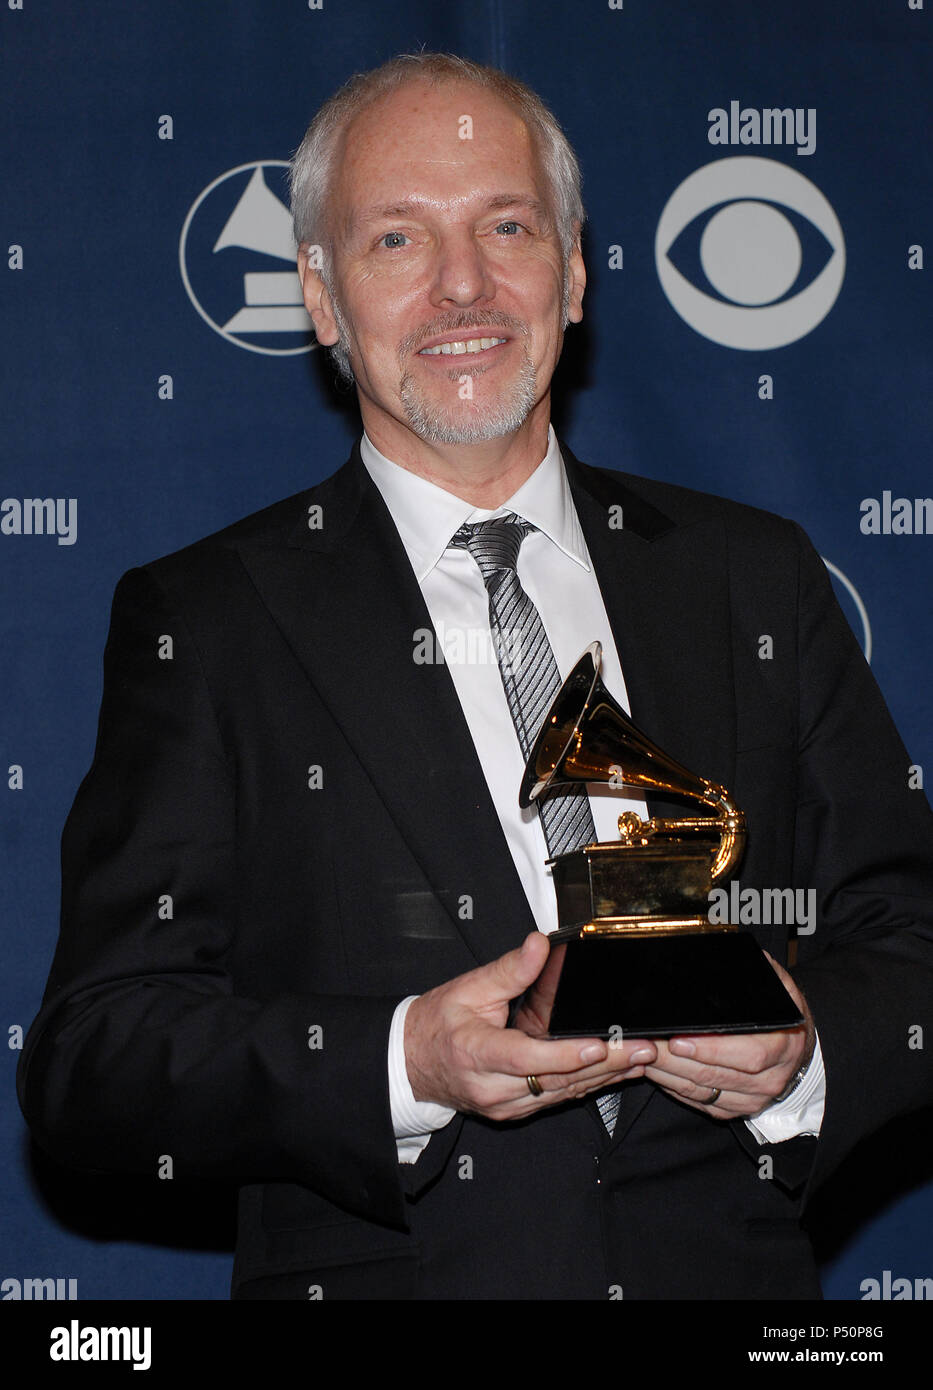 Peter Frampton backstage at the 49th Annual Grammy's  at the Staples Center in Los Angeles. February 11, 2007.  headshot eye contact smile trophy          -            FramptonPeter128.jpgFramptonPeter128  Event in Hollywood Life - California, Red Carpet Event, USA, Film Industry, Celebrities, Photography, Bestof, Arts Culture and Entertainment, Topix Celebrities fashion, Best of, Hollywood Life, Event in Hollywood Life - California,  backstage trophy, Awards show, movie celebrities, TV celebrities, Music celebrities, Topix, Bestof, Arts Culture and Entertainment, Photography,    inquiry tsuni Stock Photo